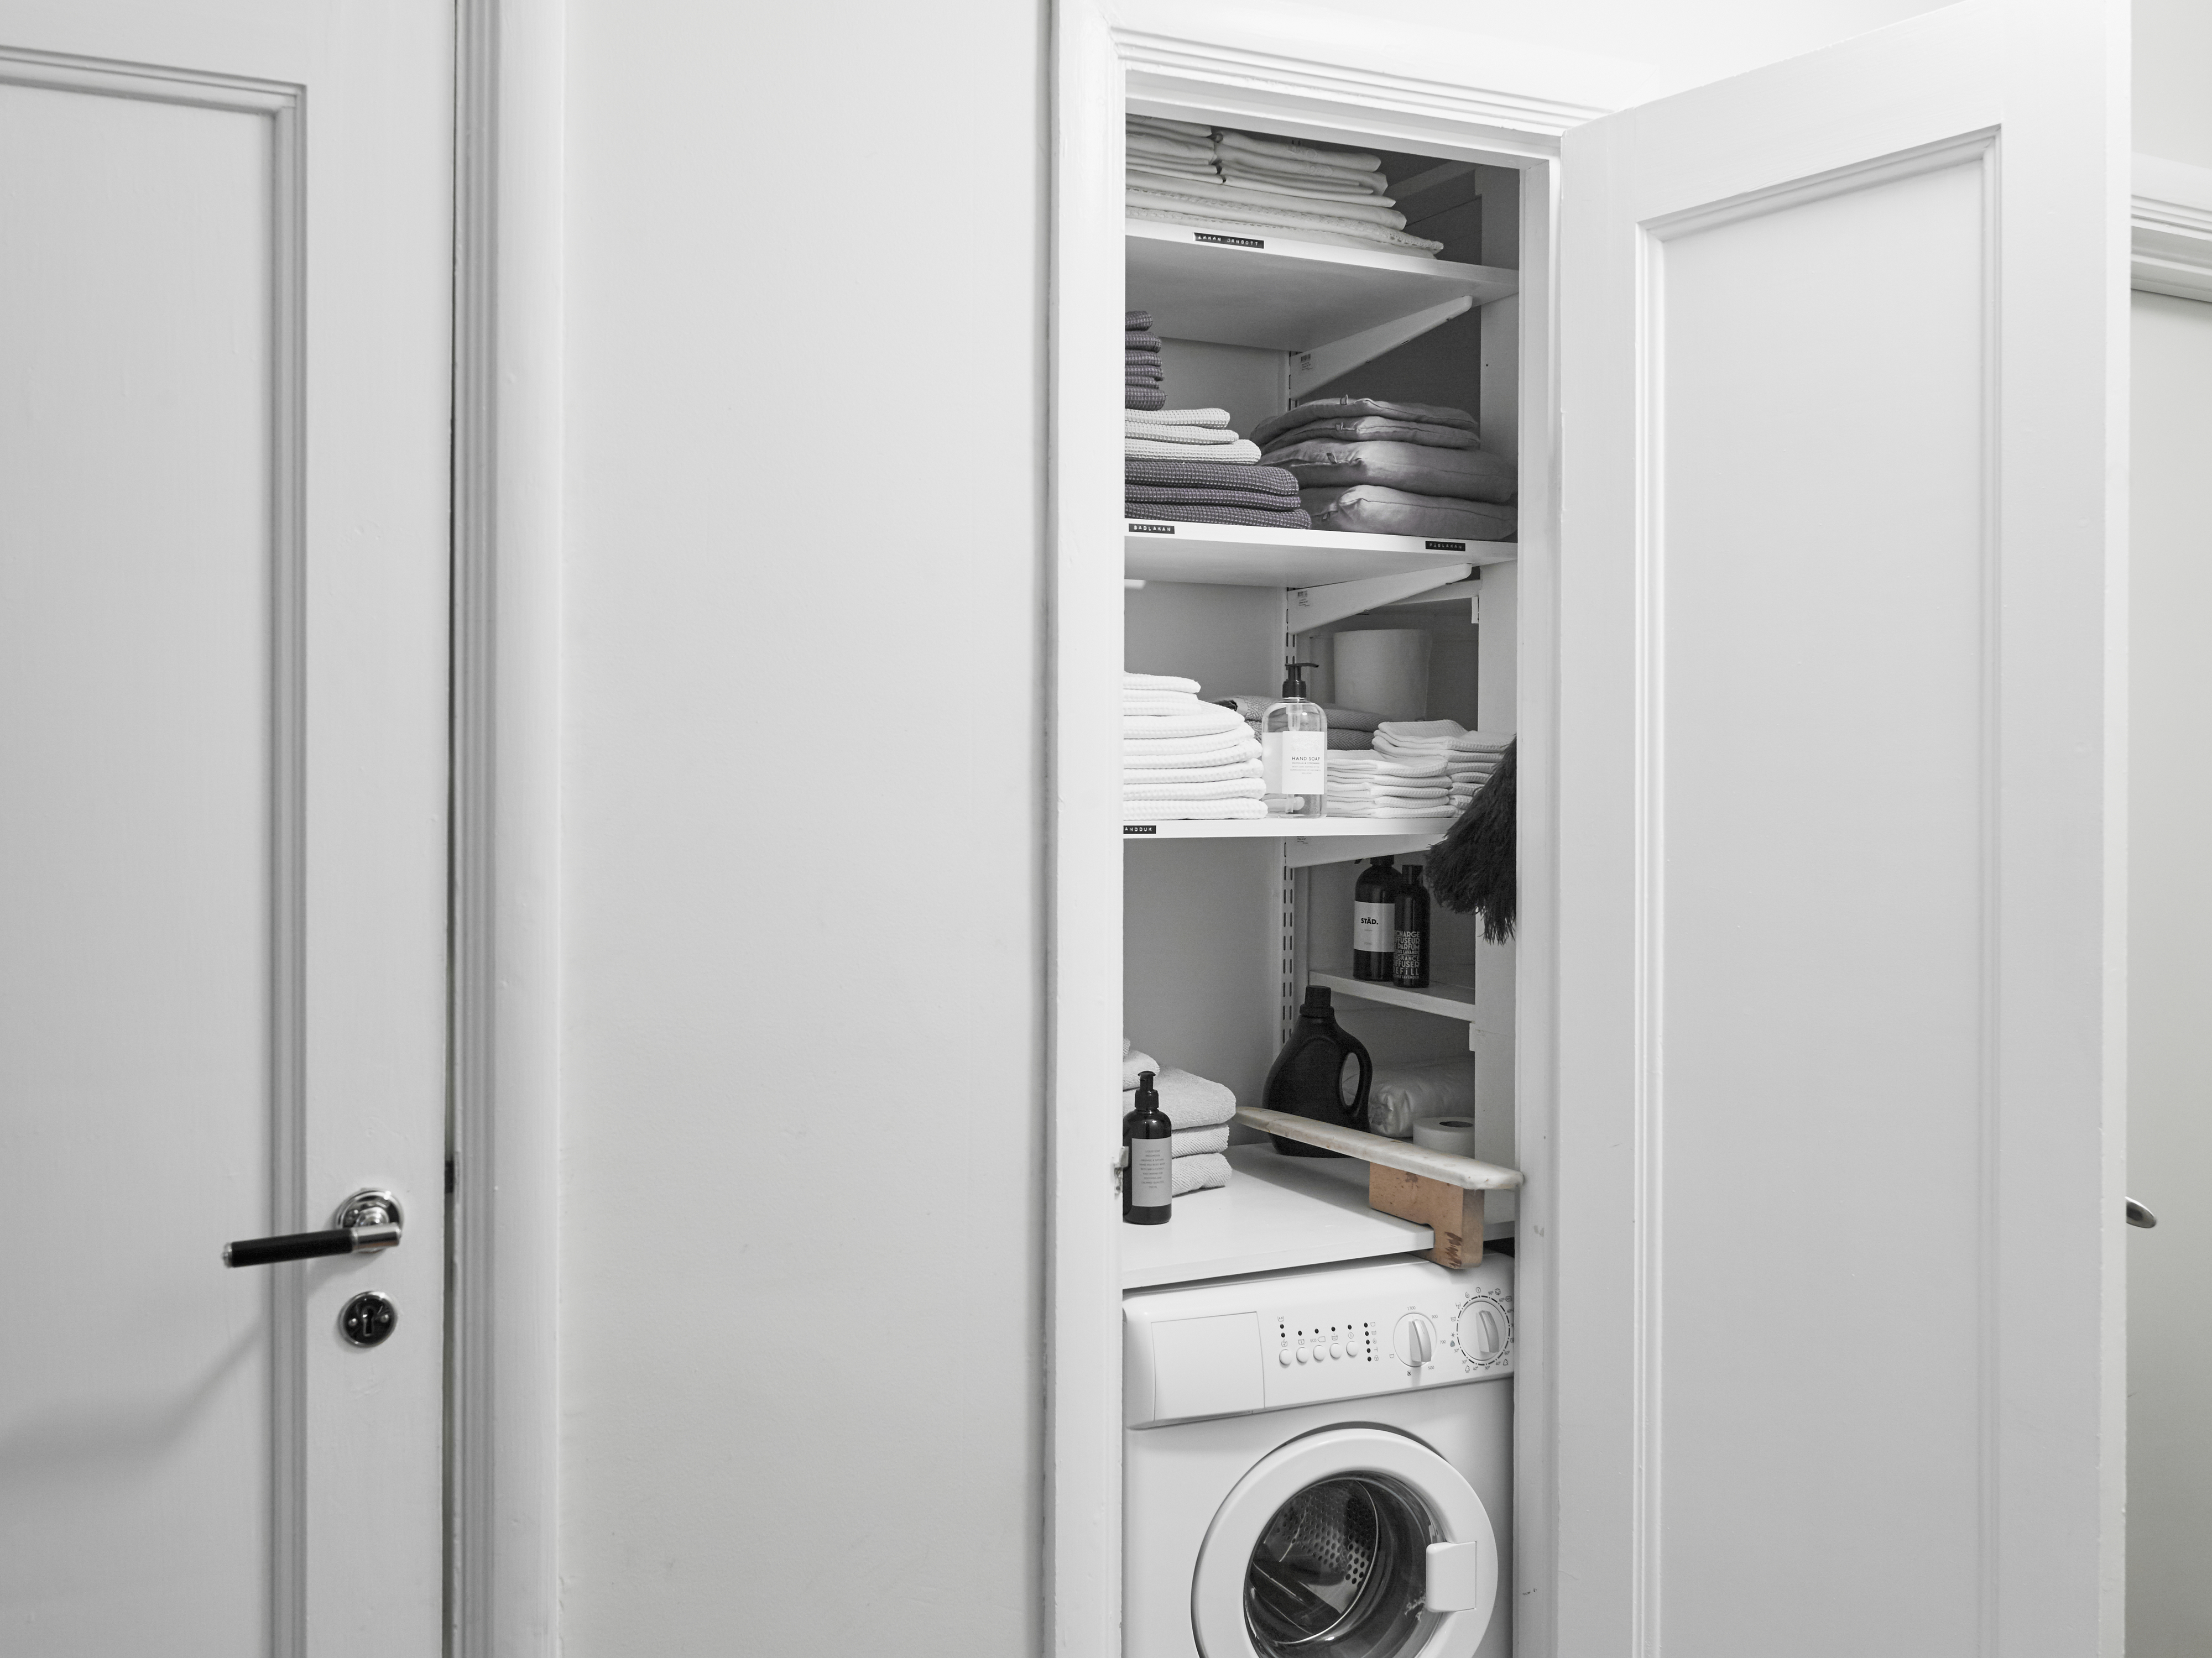 An open closet with organized shelves, towels, and a washing machine